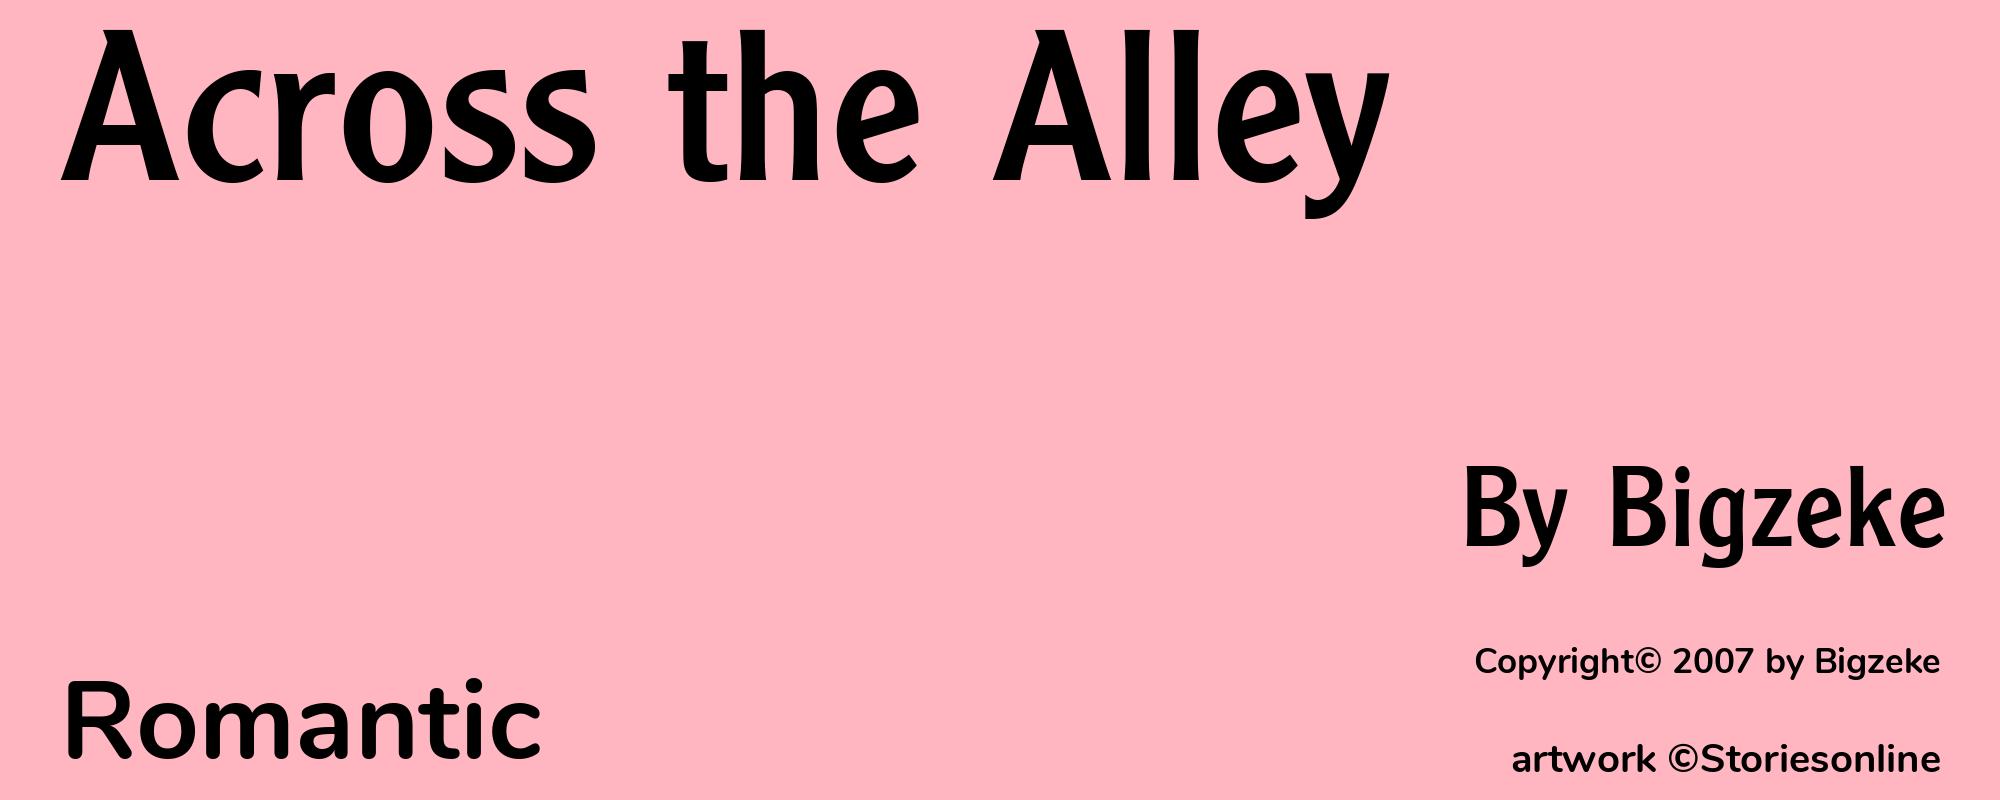 Across the Alley - Cover